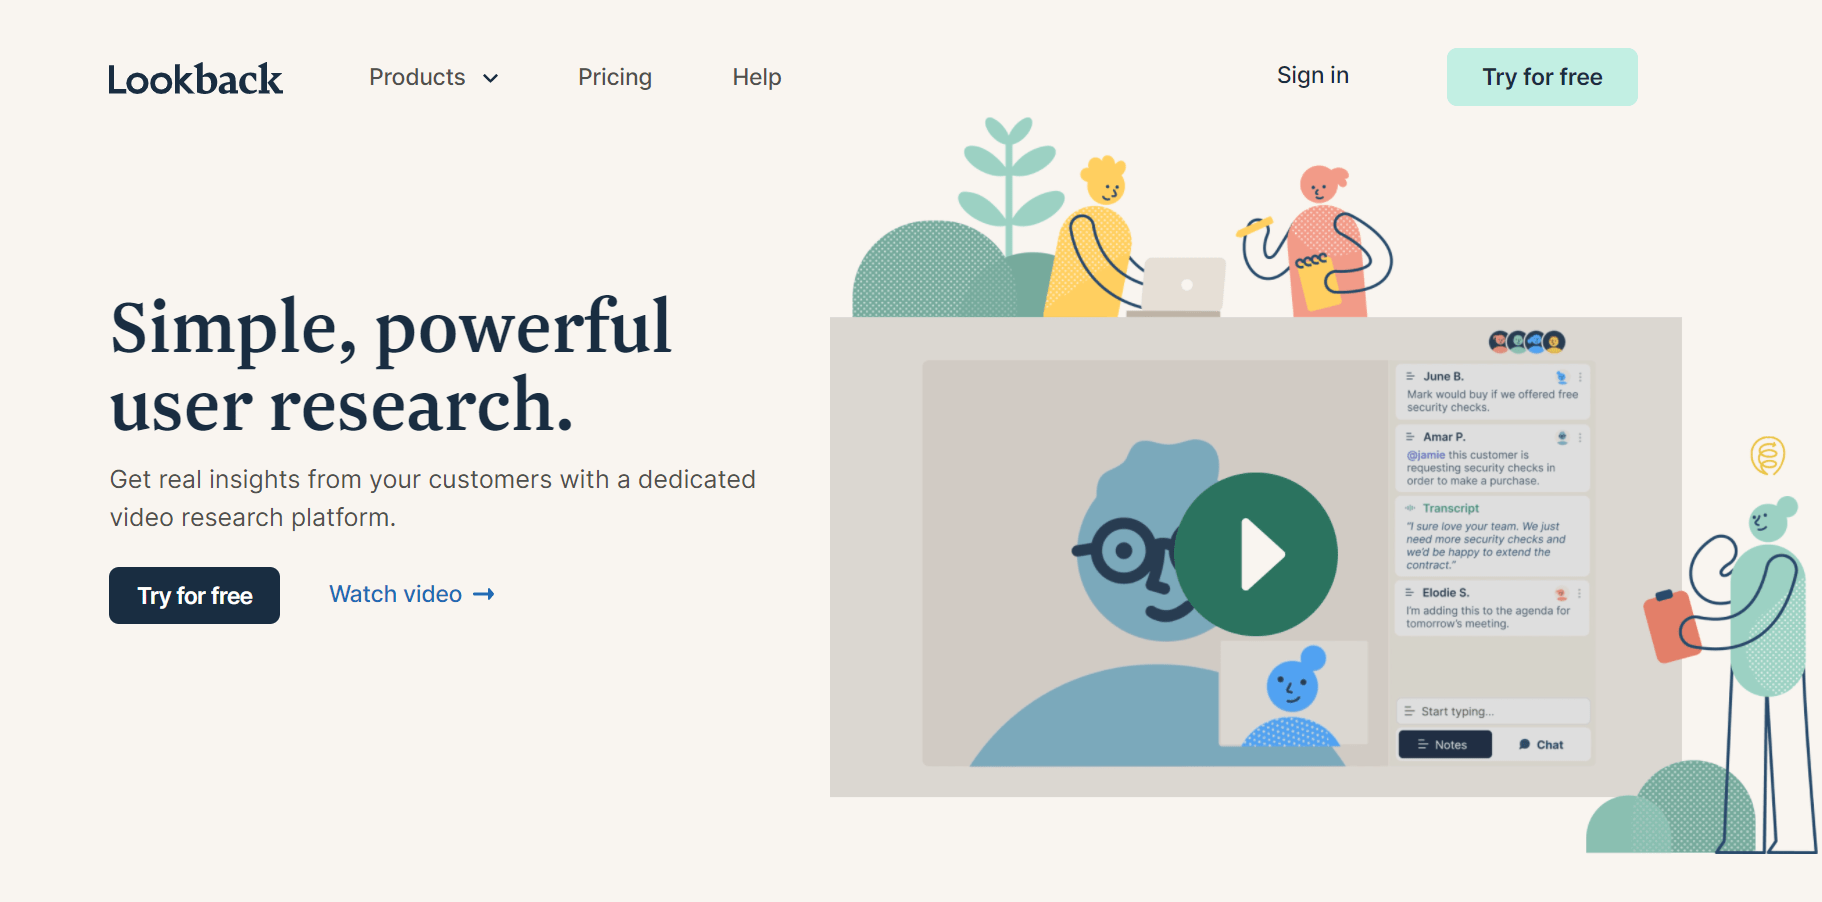 ux research tools